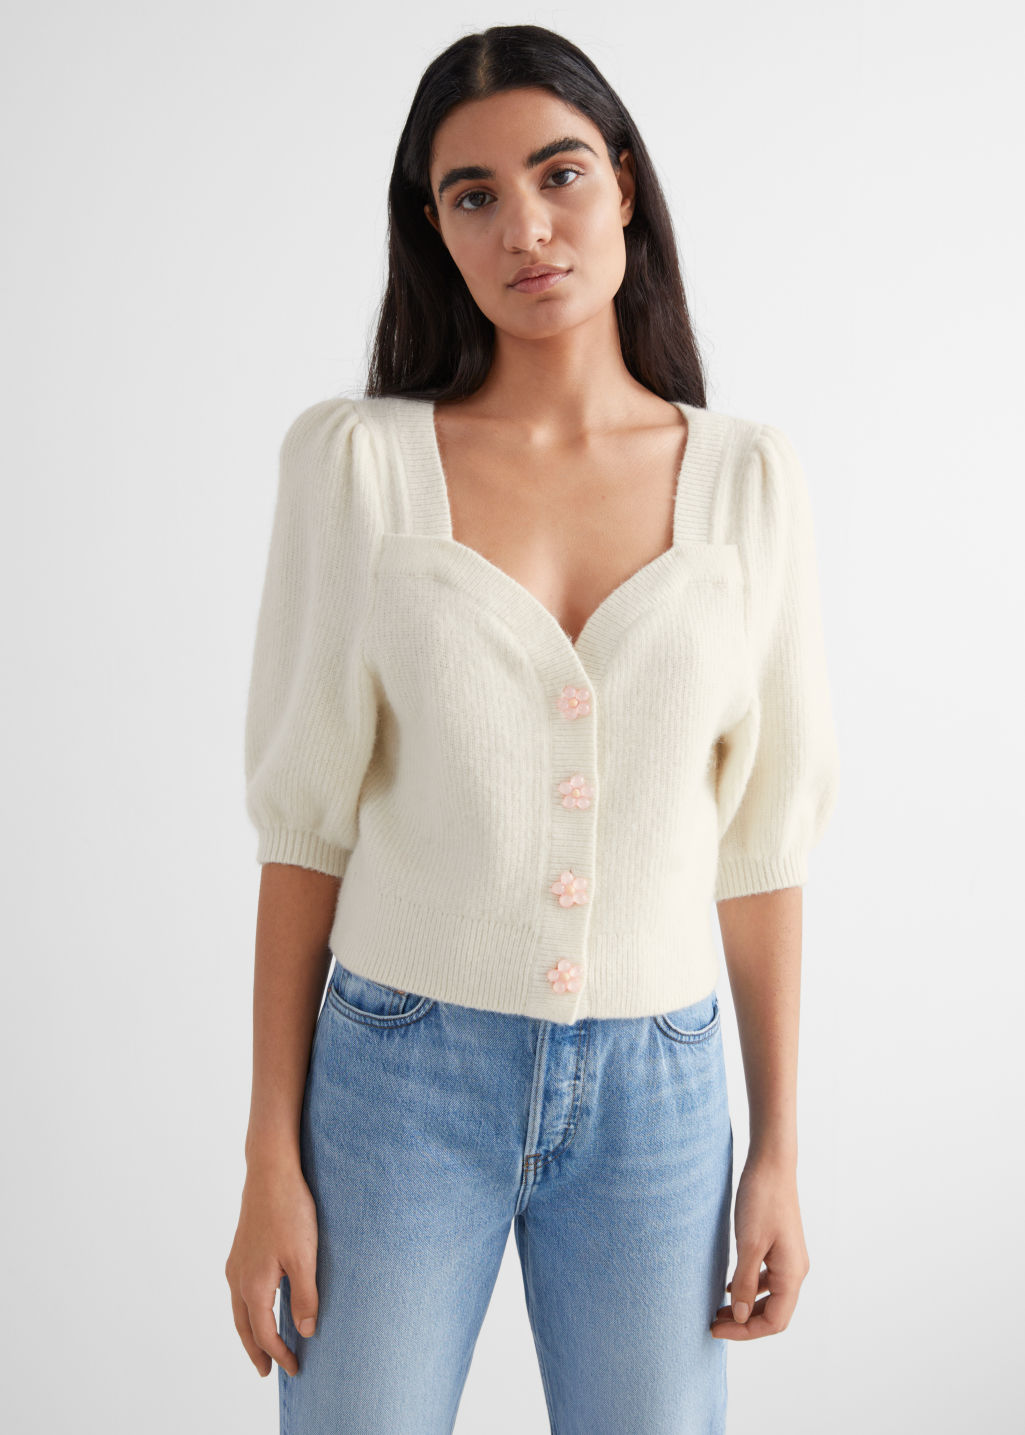 Floral Button Puff Sleeve Cardigan - Cream - Cardigans - & Other Stories